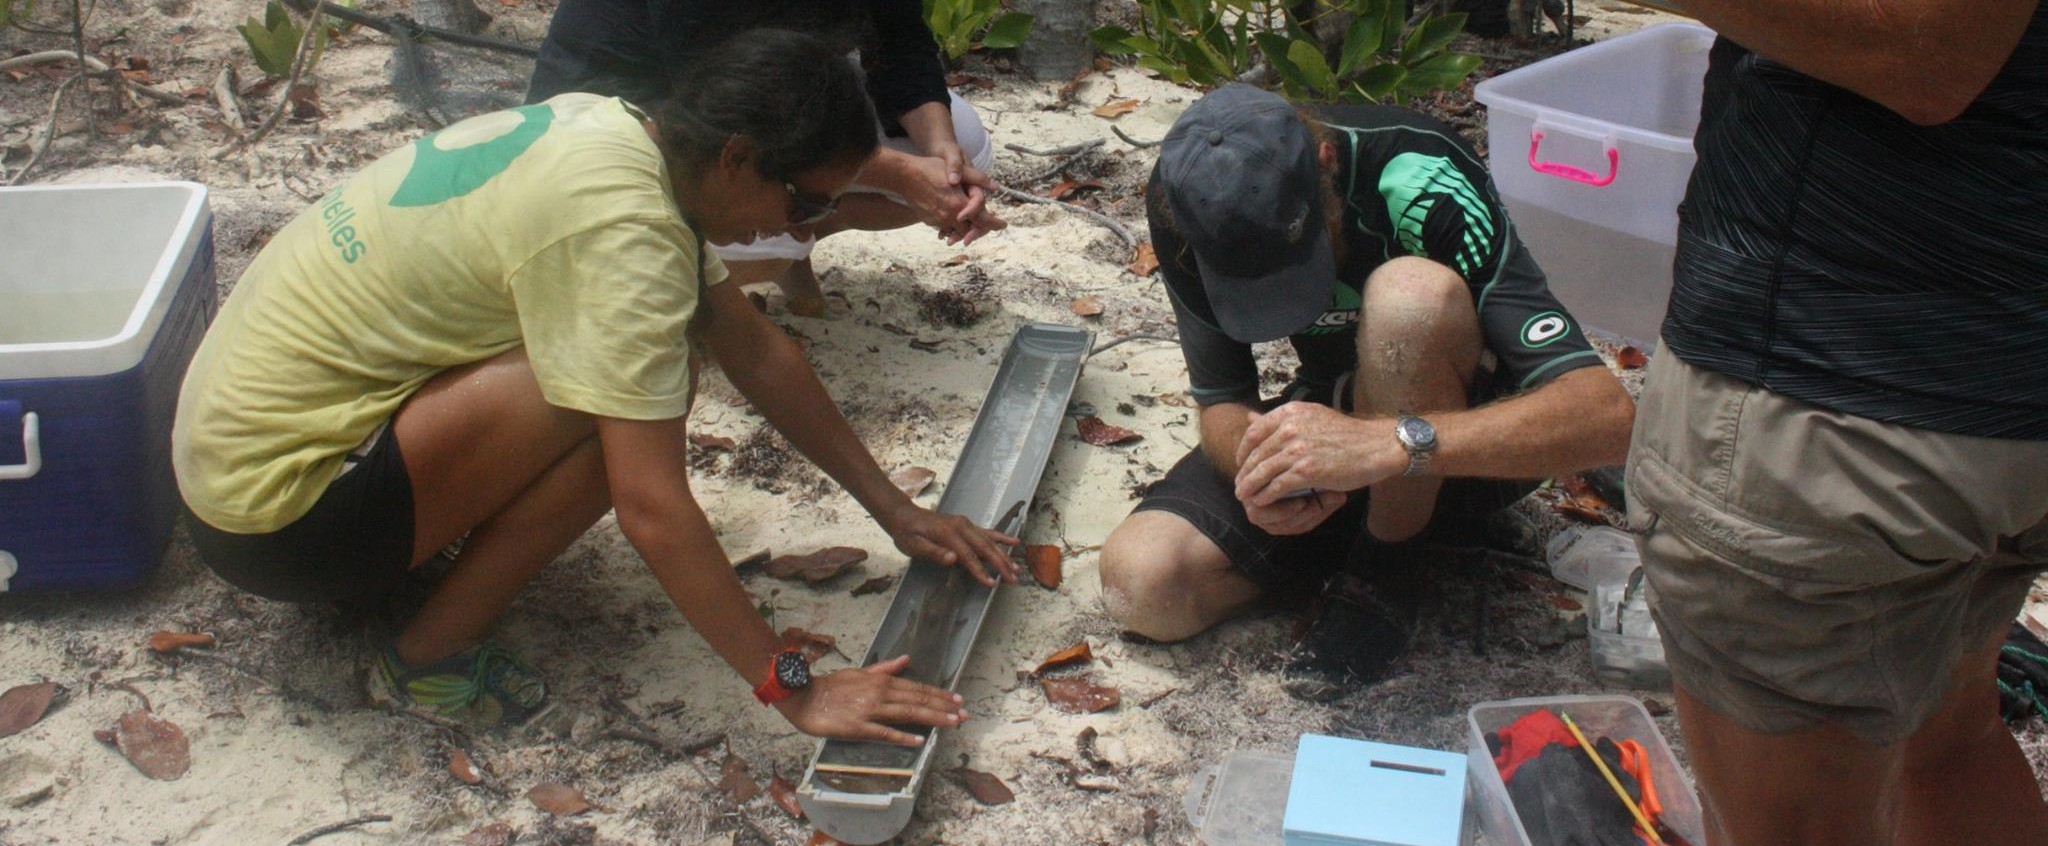 Participant researching lemon sharks in Seychelles